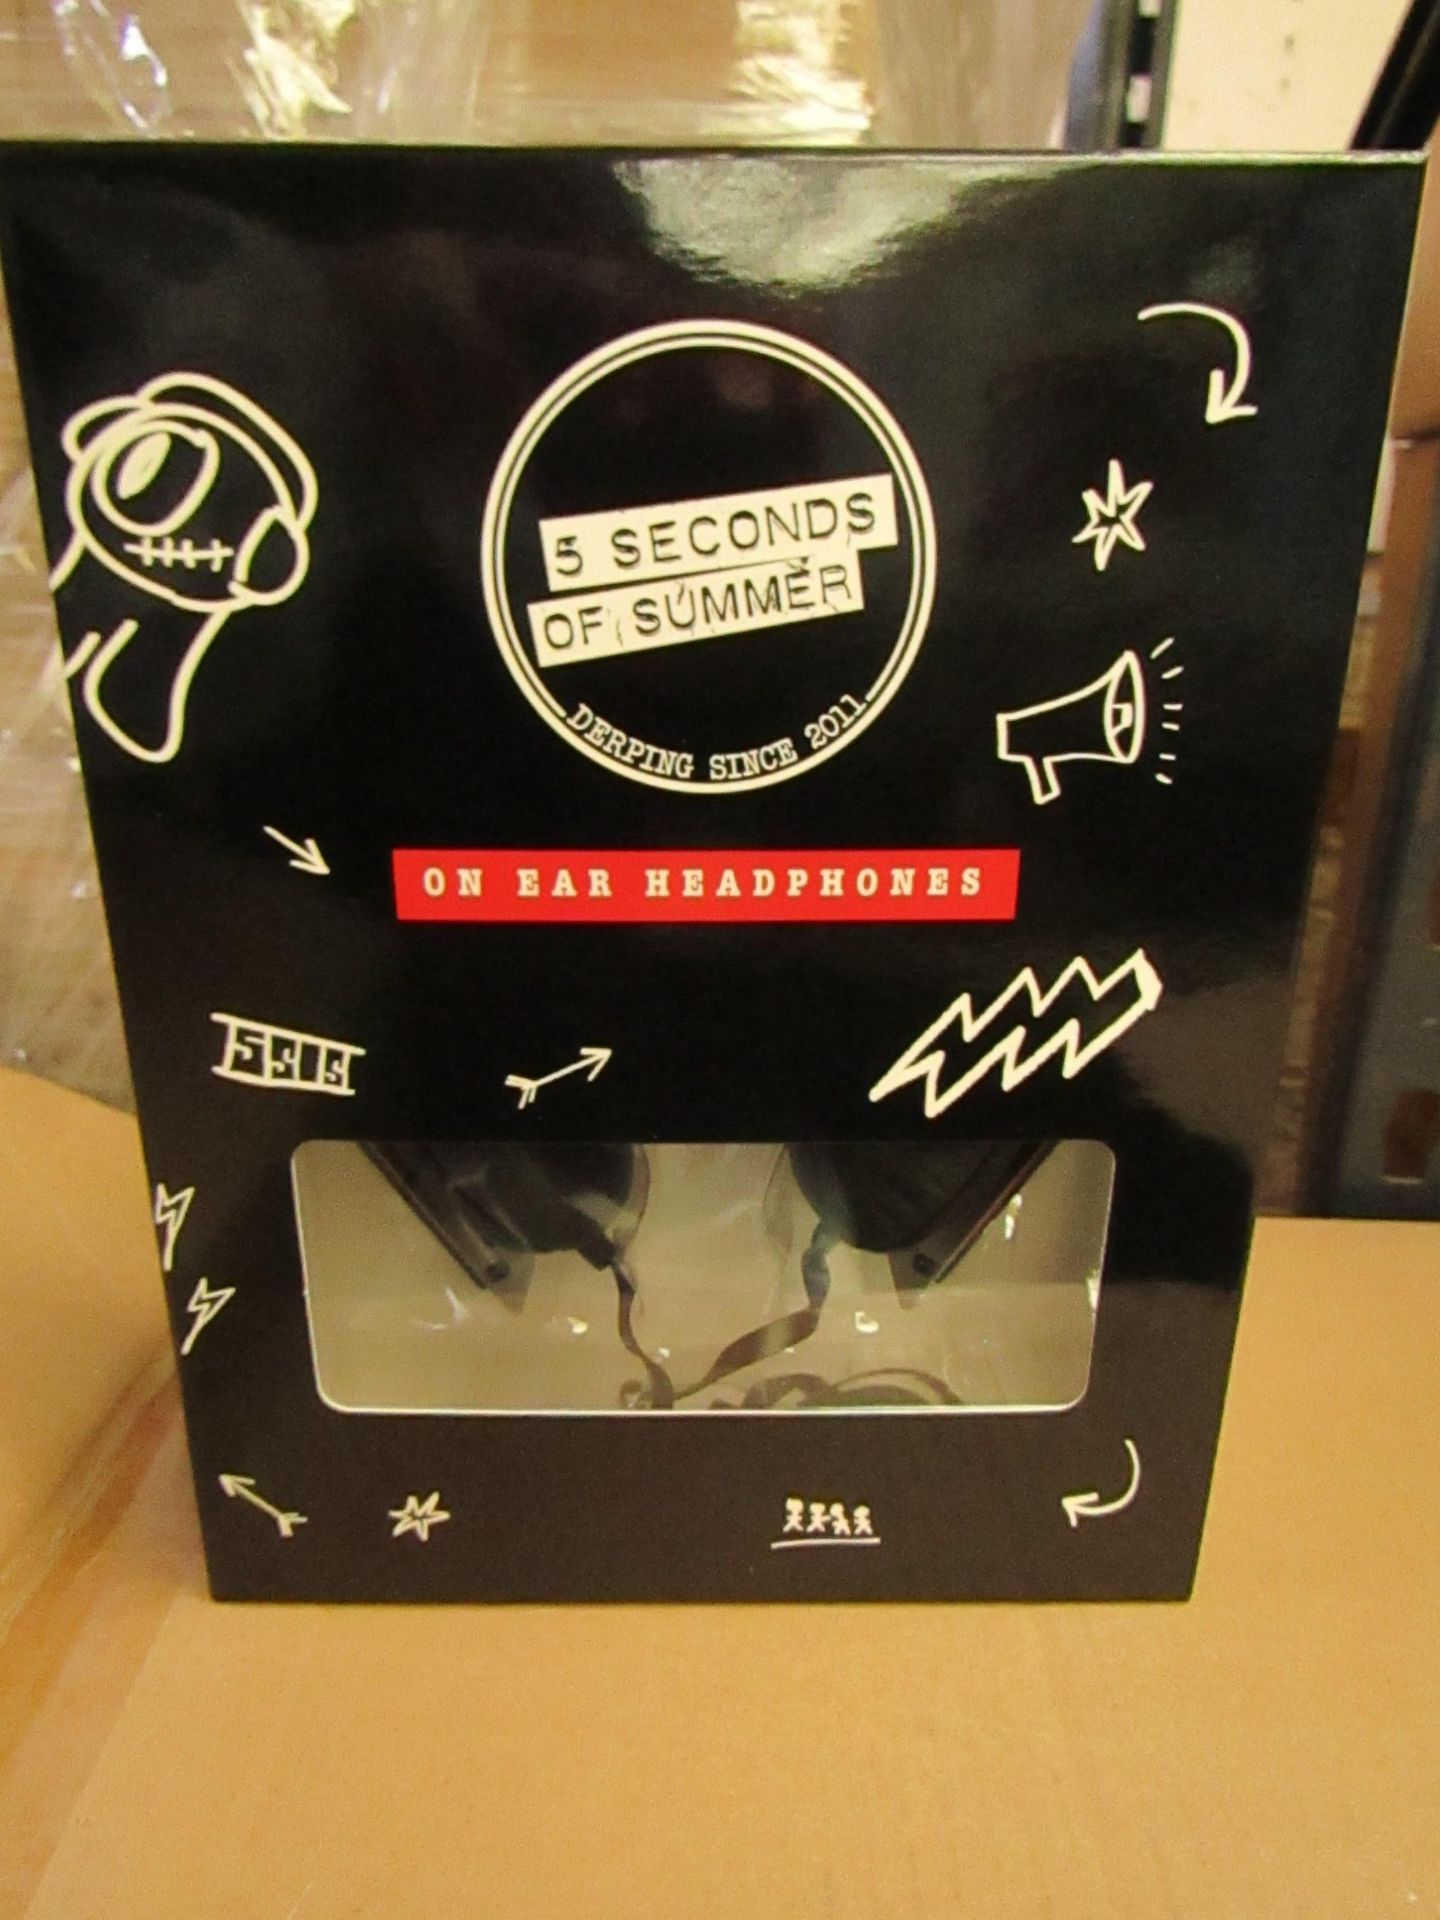 5 x sets of  5 Seconds of Summer On Ear Headphones RRP £8.99 each on ebay new and boxed